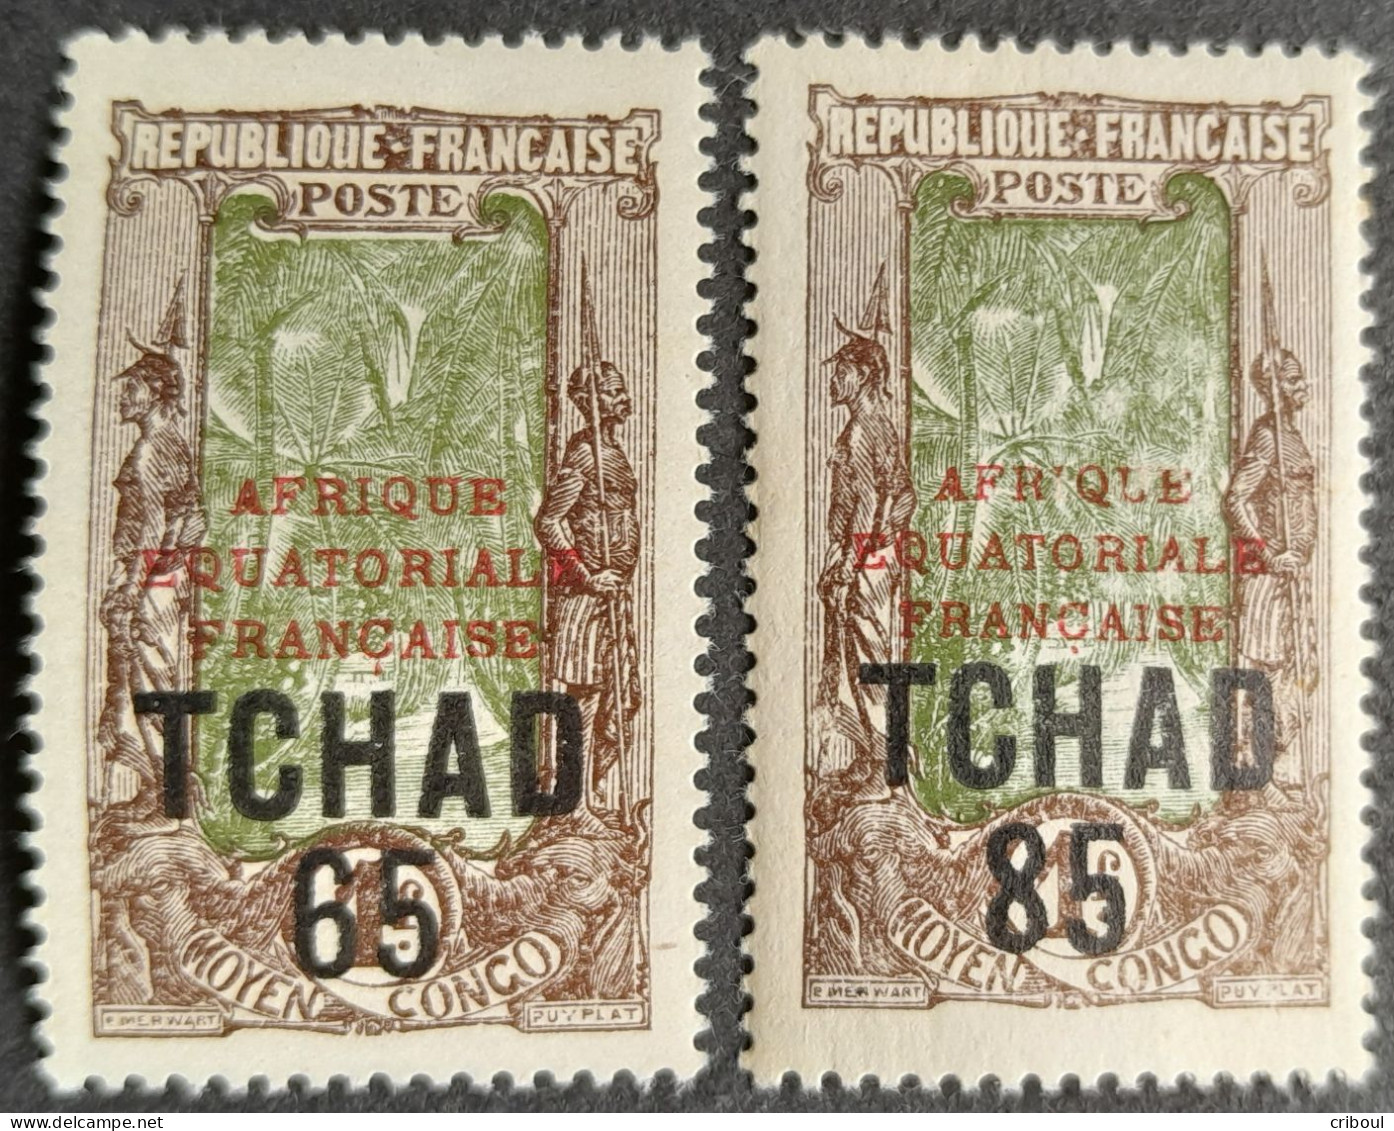 Tchad Chad 1925 Arbre Cocotier Tree Surchargé Overprinted AFRIQUE EQUATORIALE FRANCAISE TCHAD Yvert 45 46 * MH Adhérence - Unused Stamps